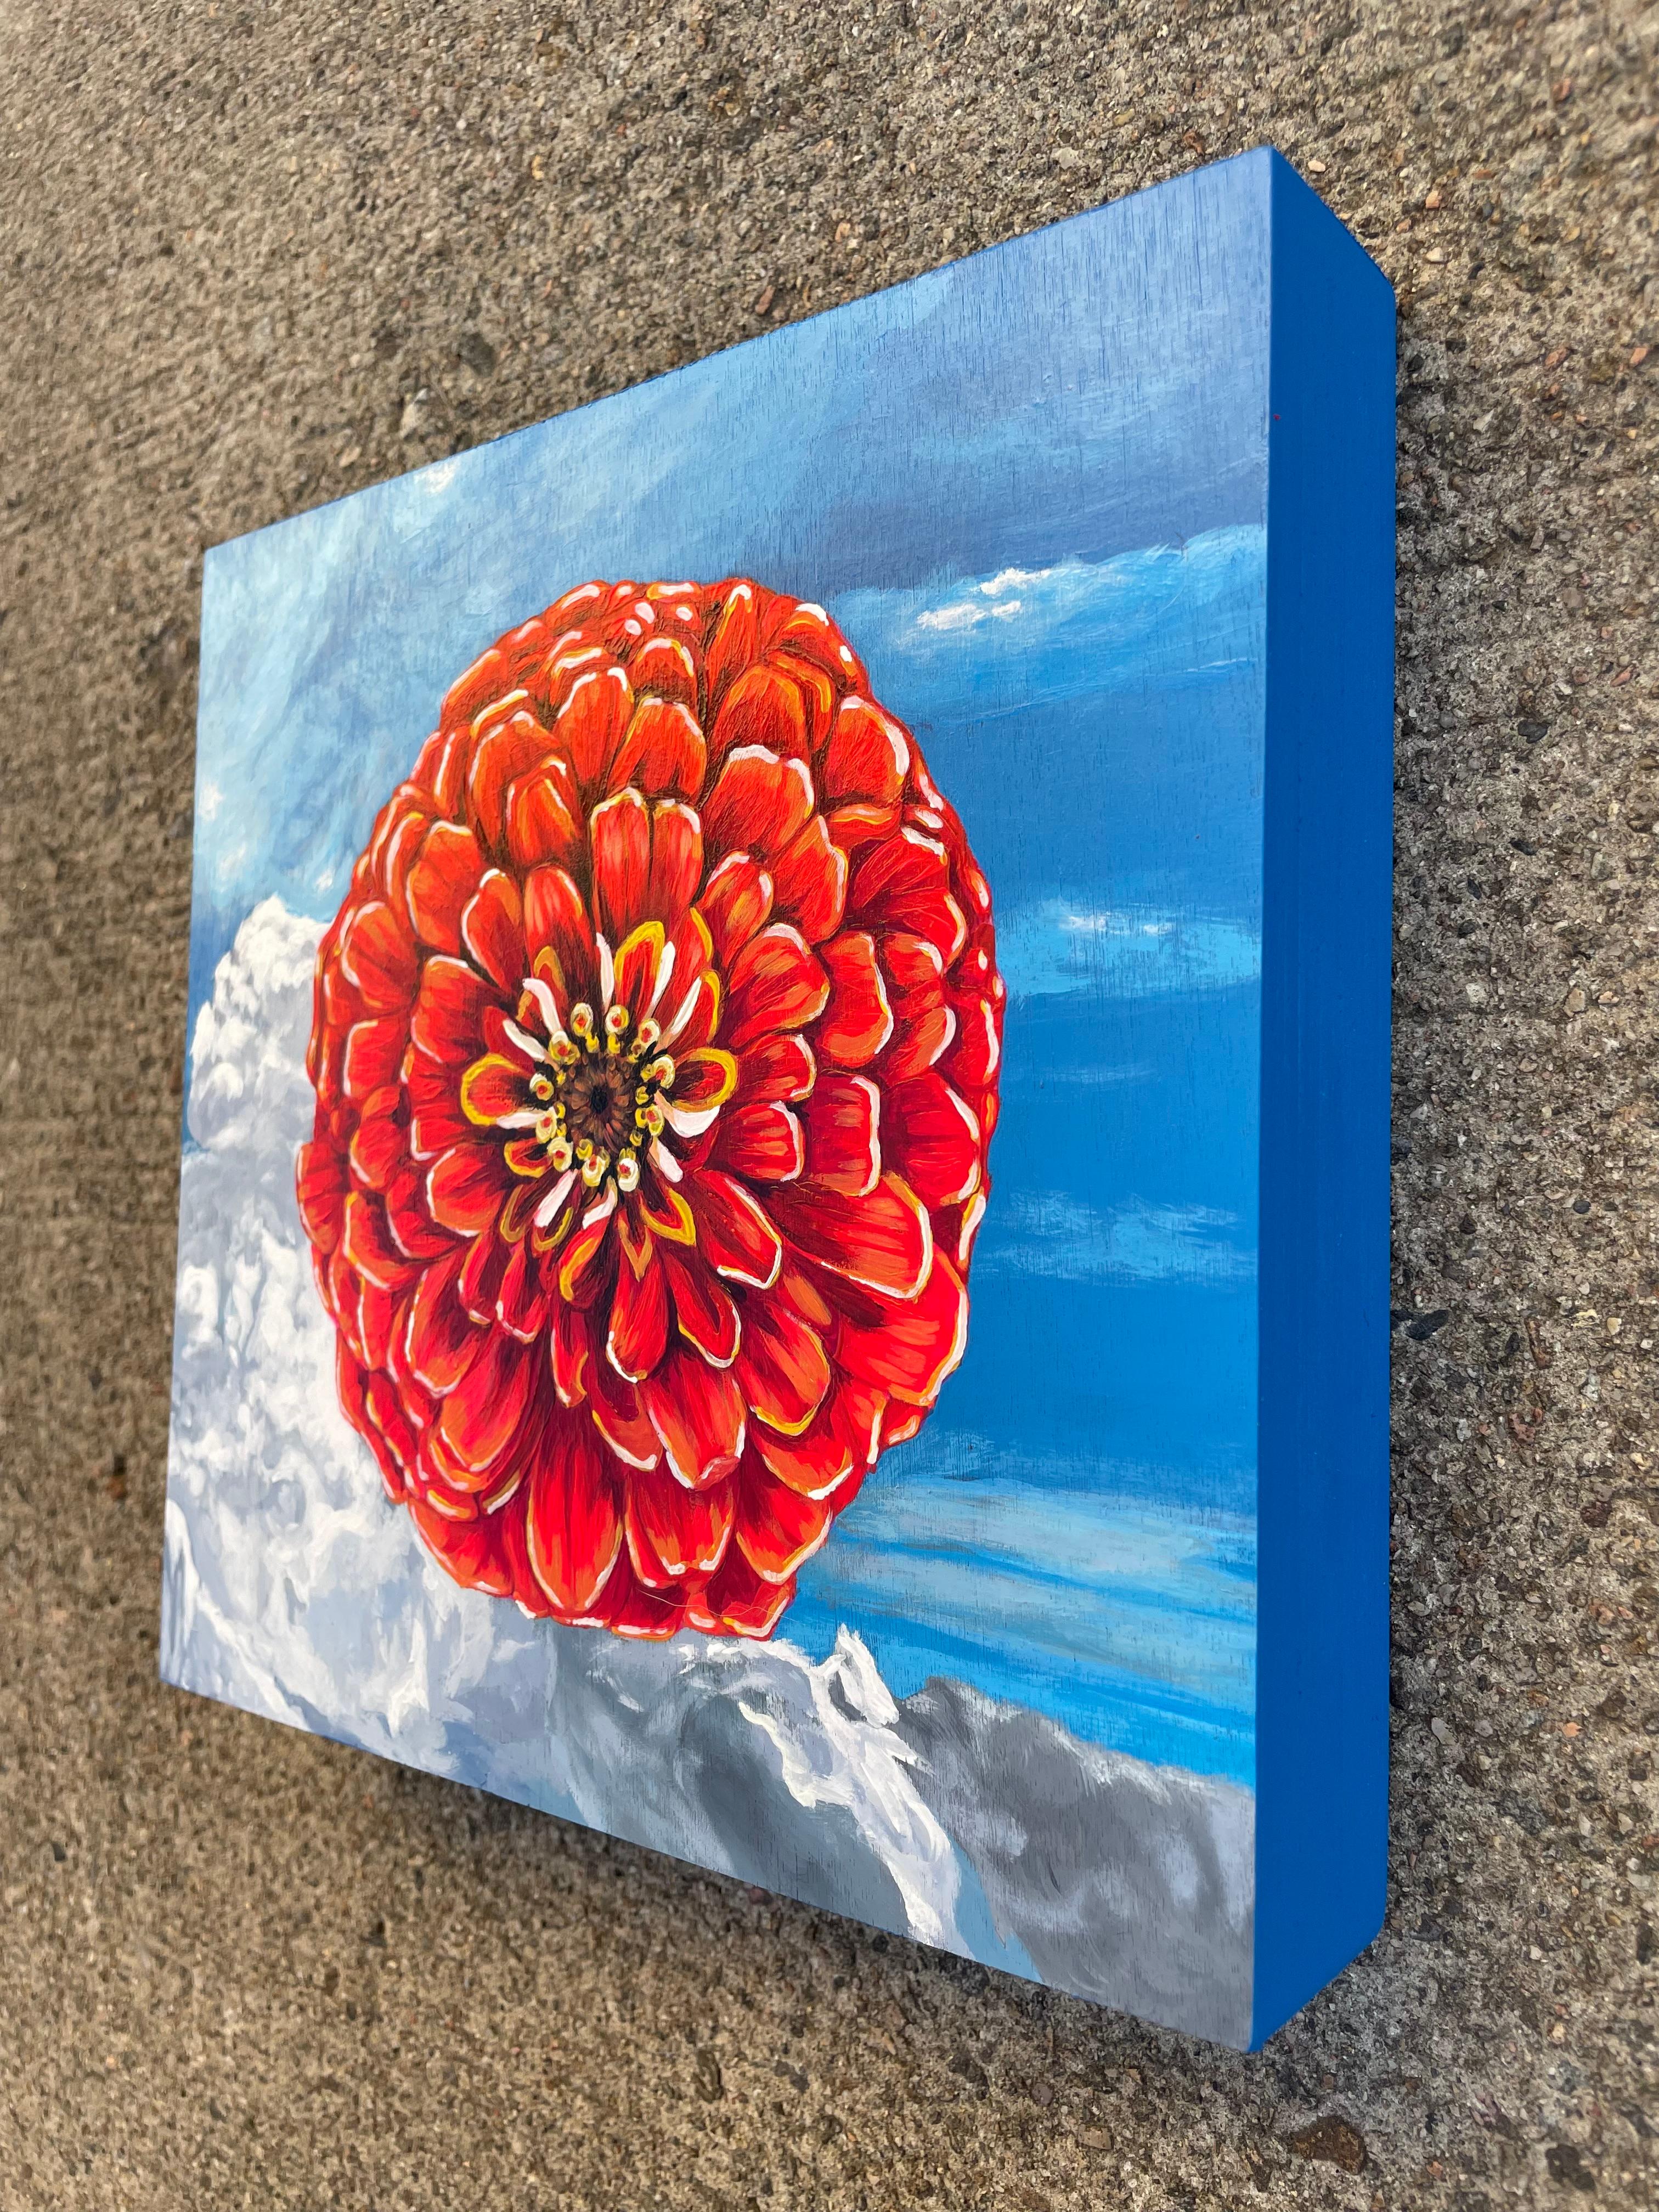 Alexandrea Pangburn’s “Zinnia Sky,” a 2023 artwork, is a celebration of floral splendor set against the vastness of the sky. This original acrylic painting on wood panel, measuring 8 x 8 inches with a depth of 1.50 inches, captures the fiery beauty